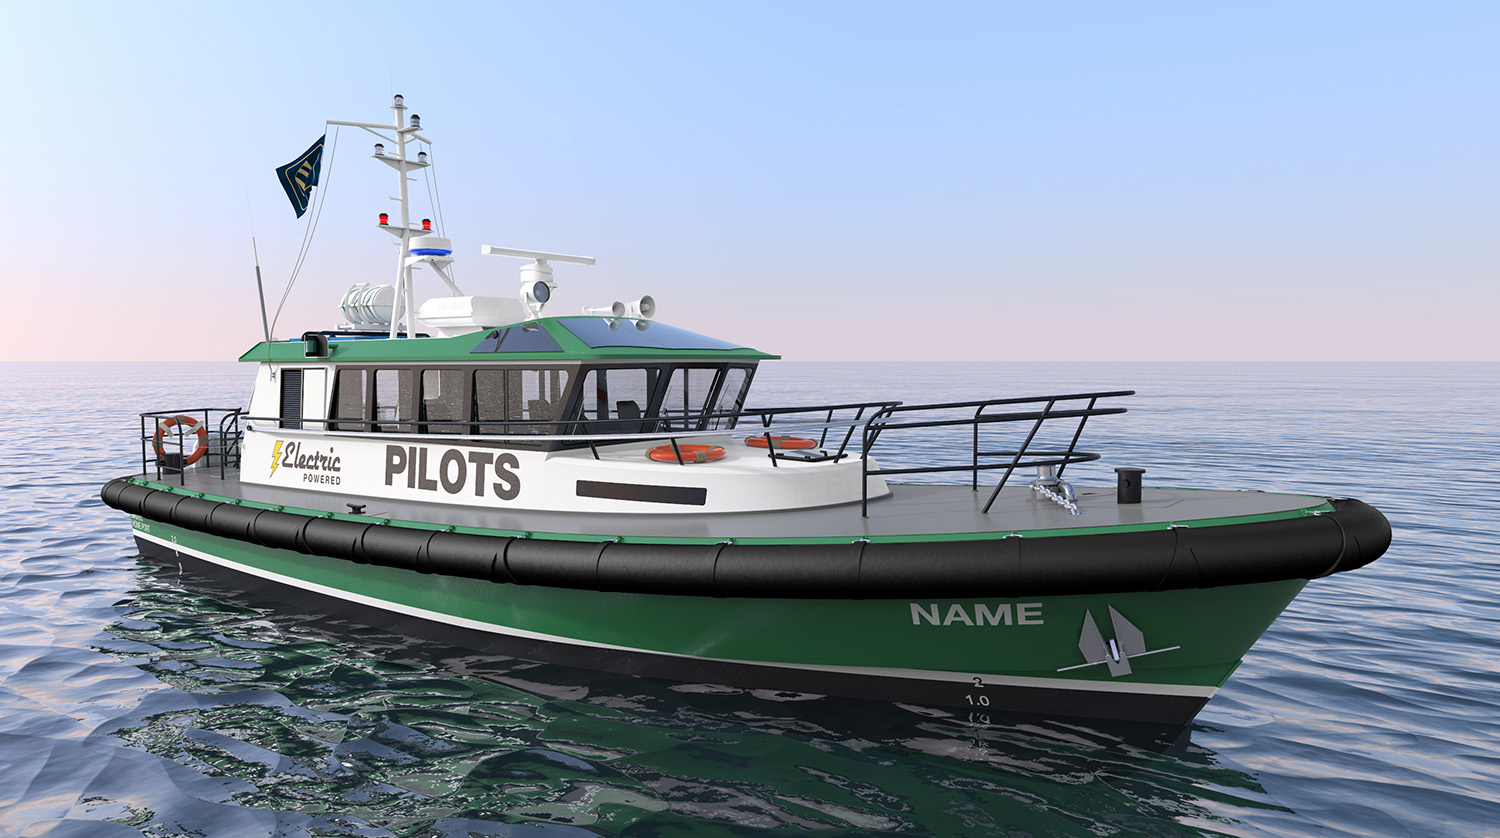 A new all-electric pilot boat unveiled by Robert Allan to ...